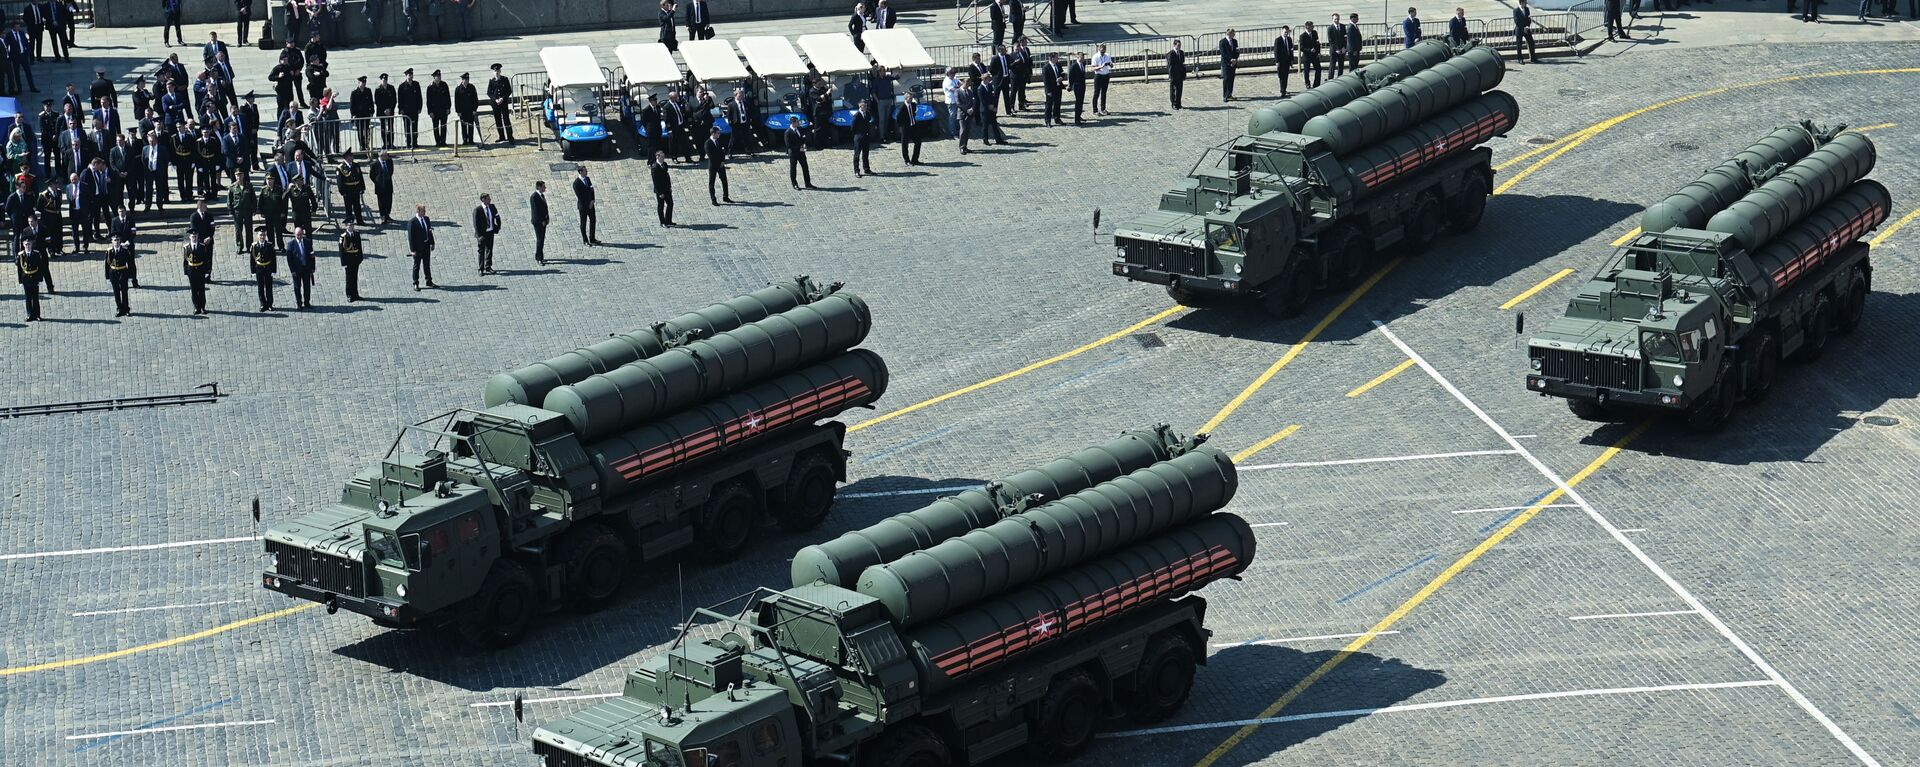 S-400 missile defence systems at the repetition of the Victory Day Parade, May 2019. - Sputnik International, 1920, 19.03.2021